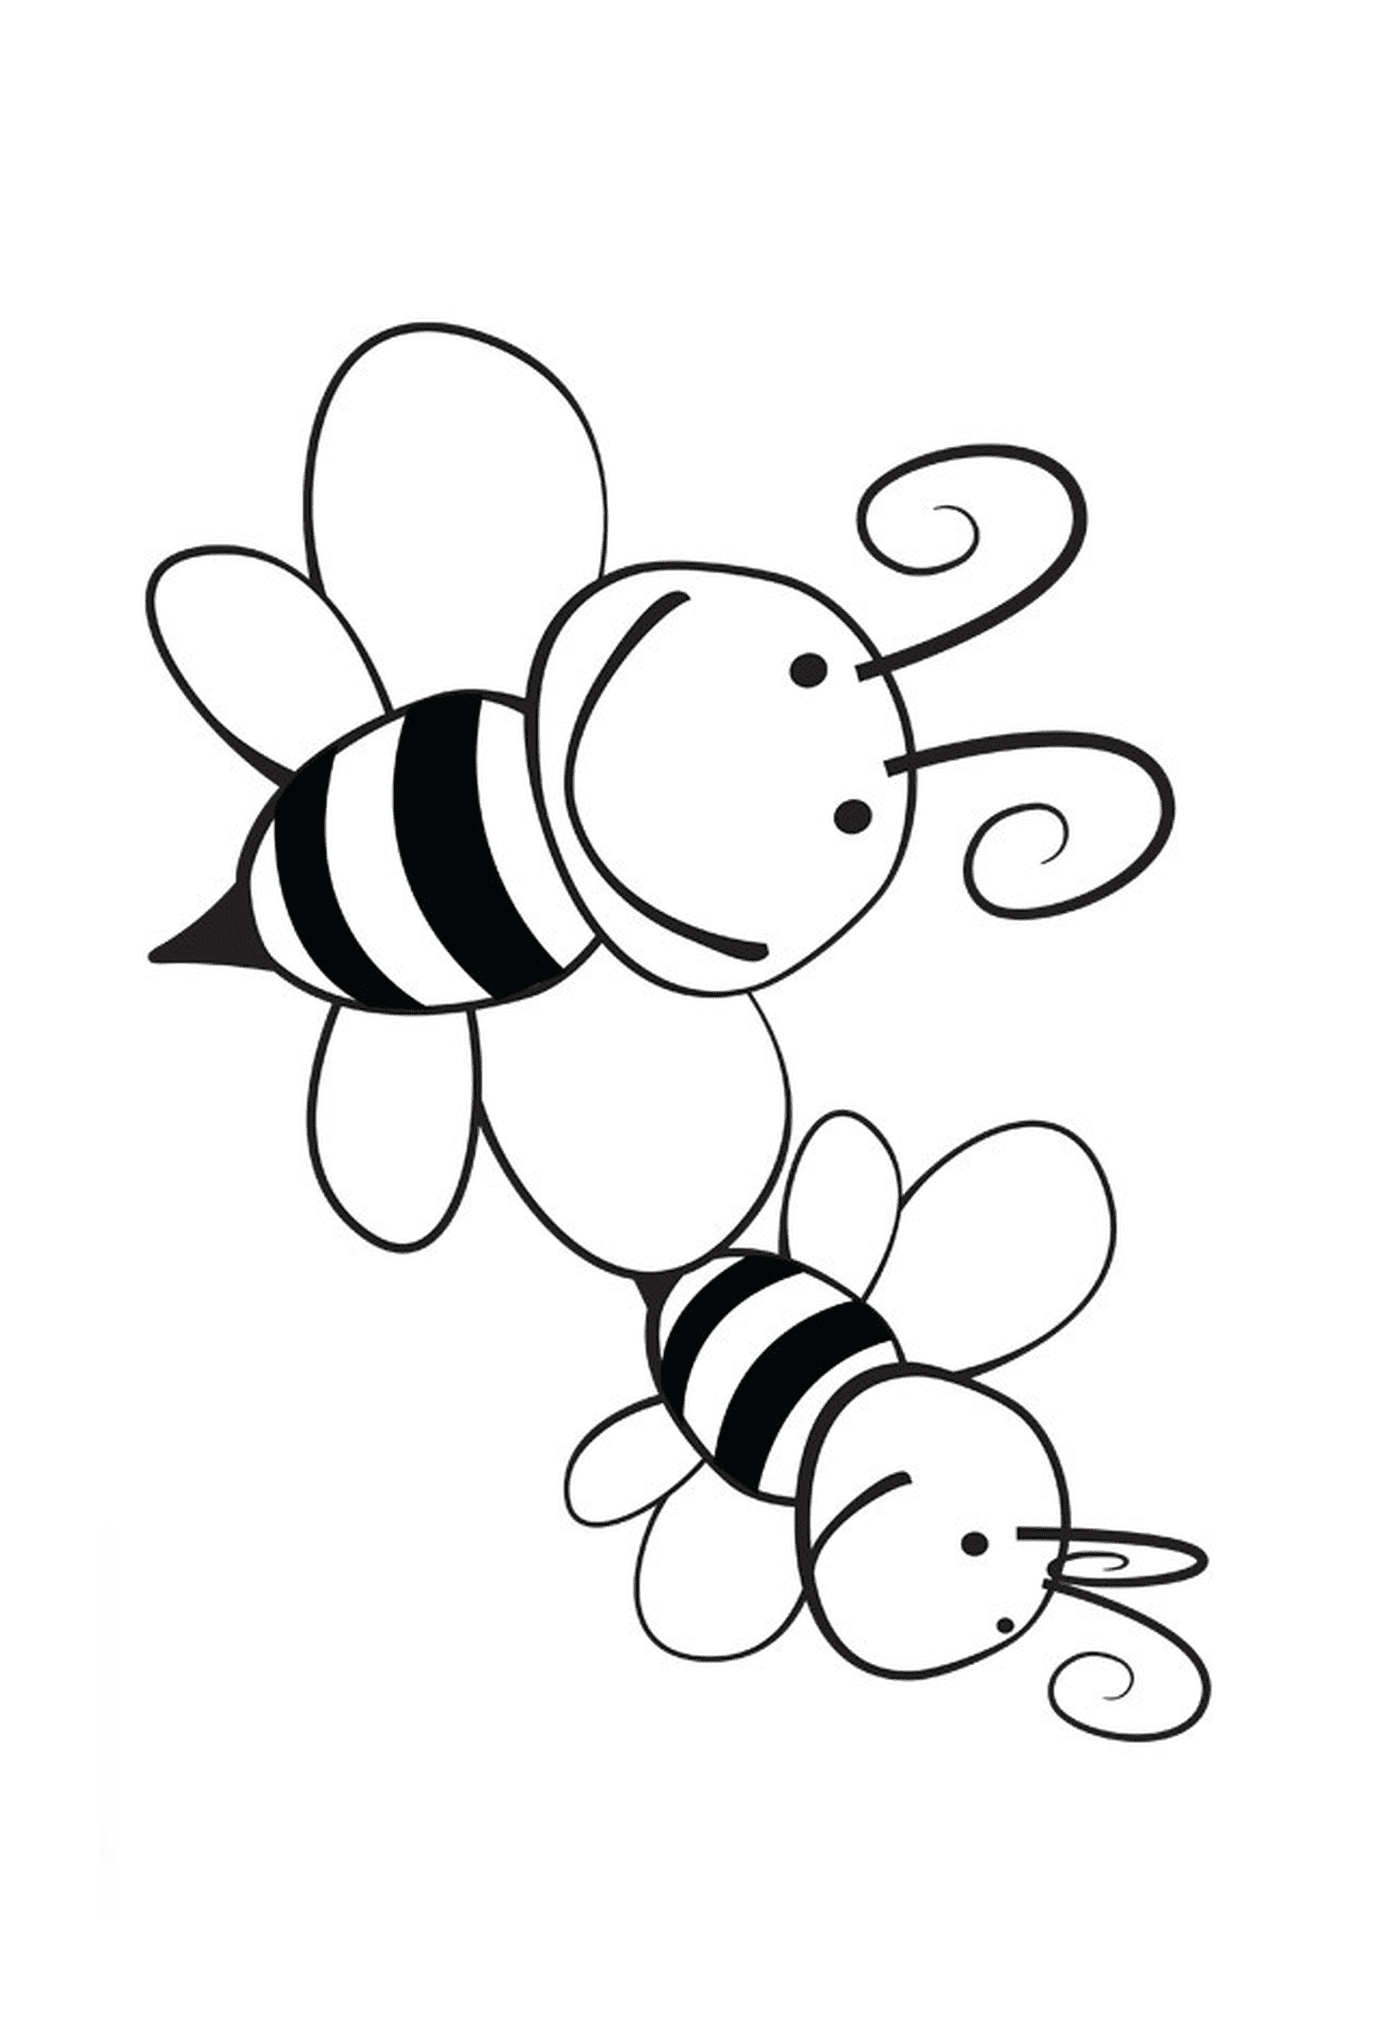  Two smiling bees together 